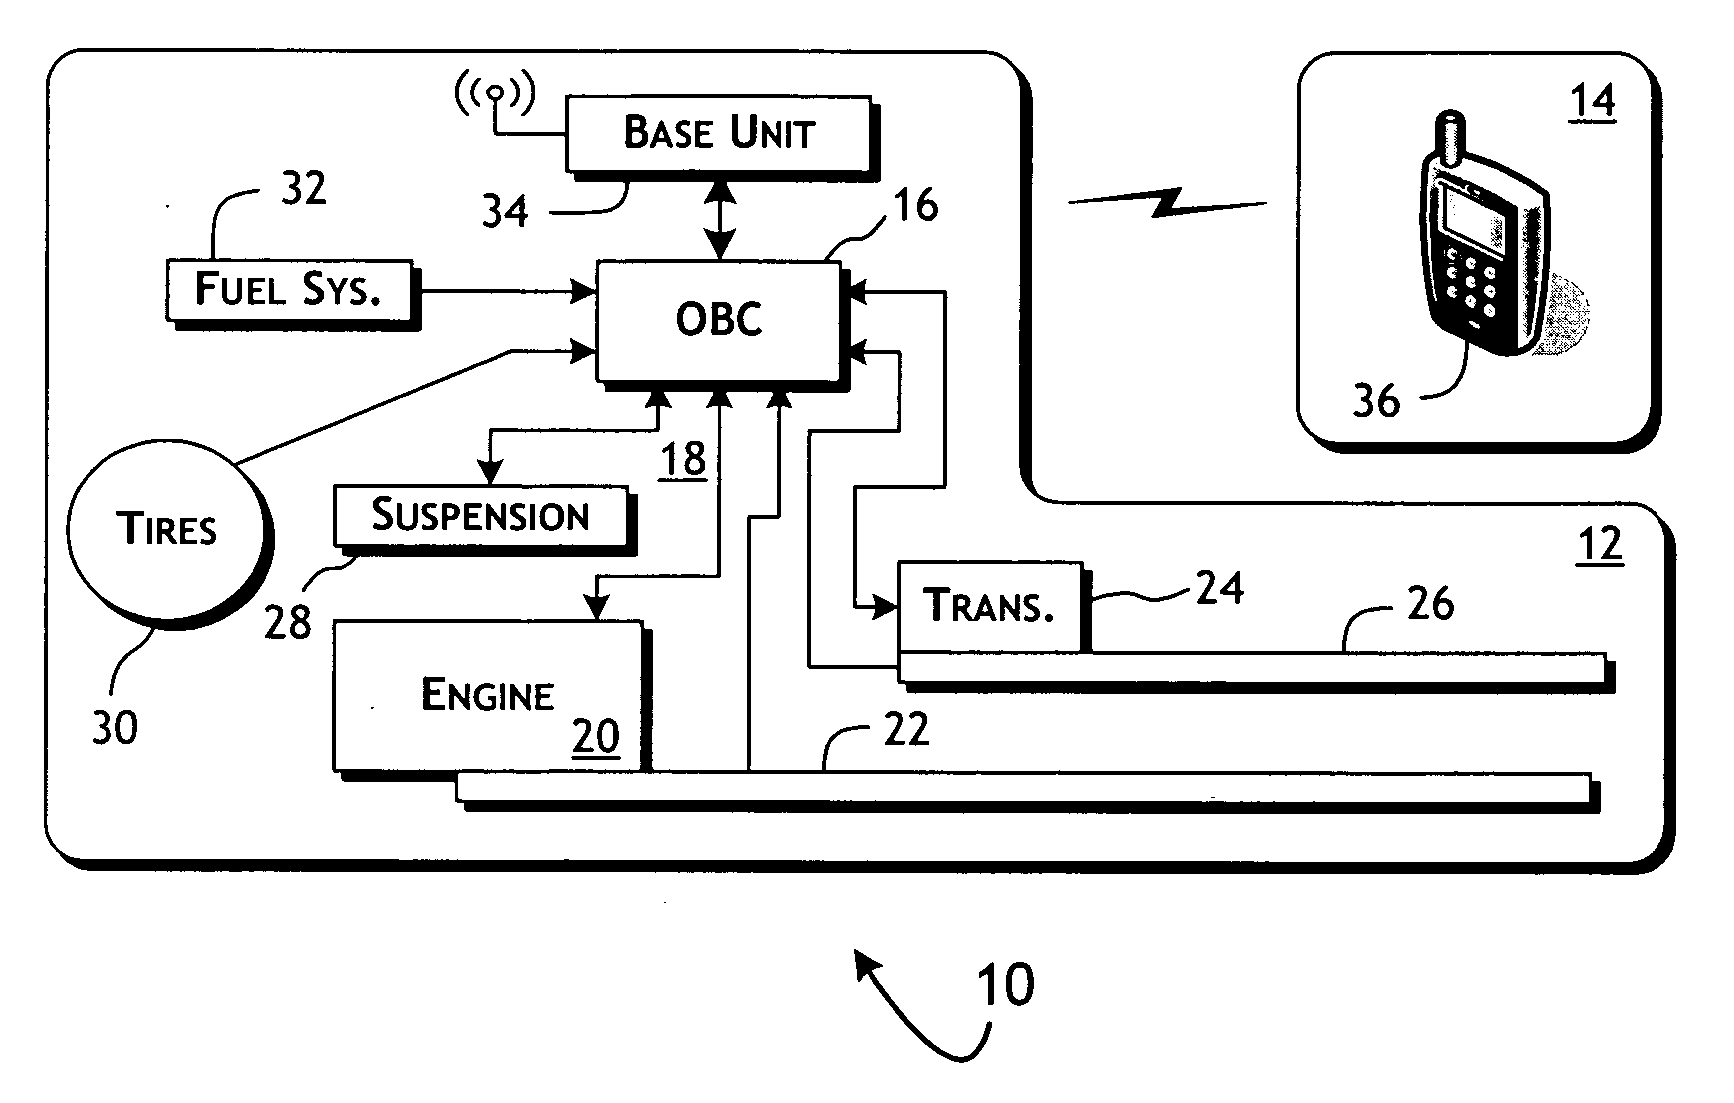 System and methods of performing real-time on-board automotive telemetry analysis and reporting